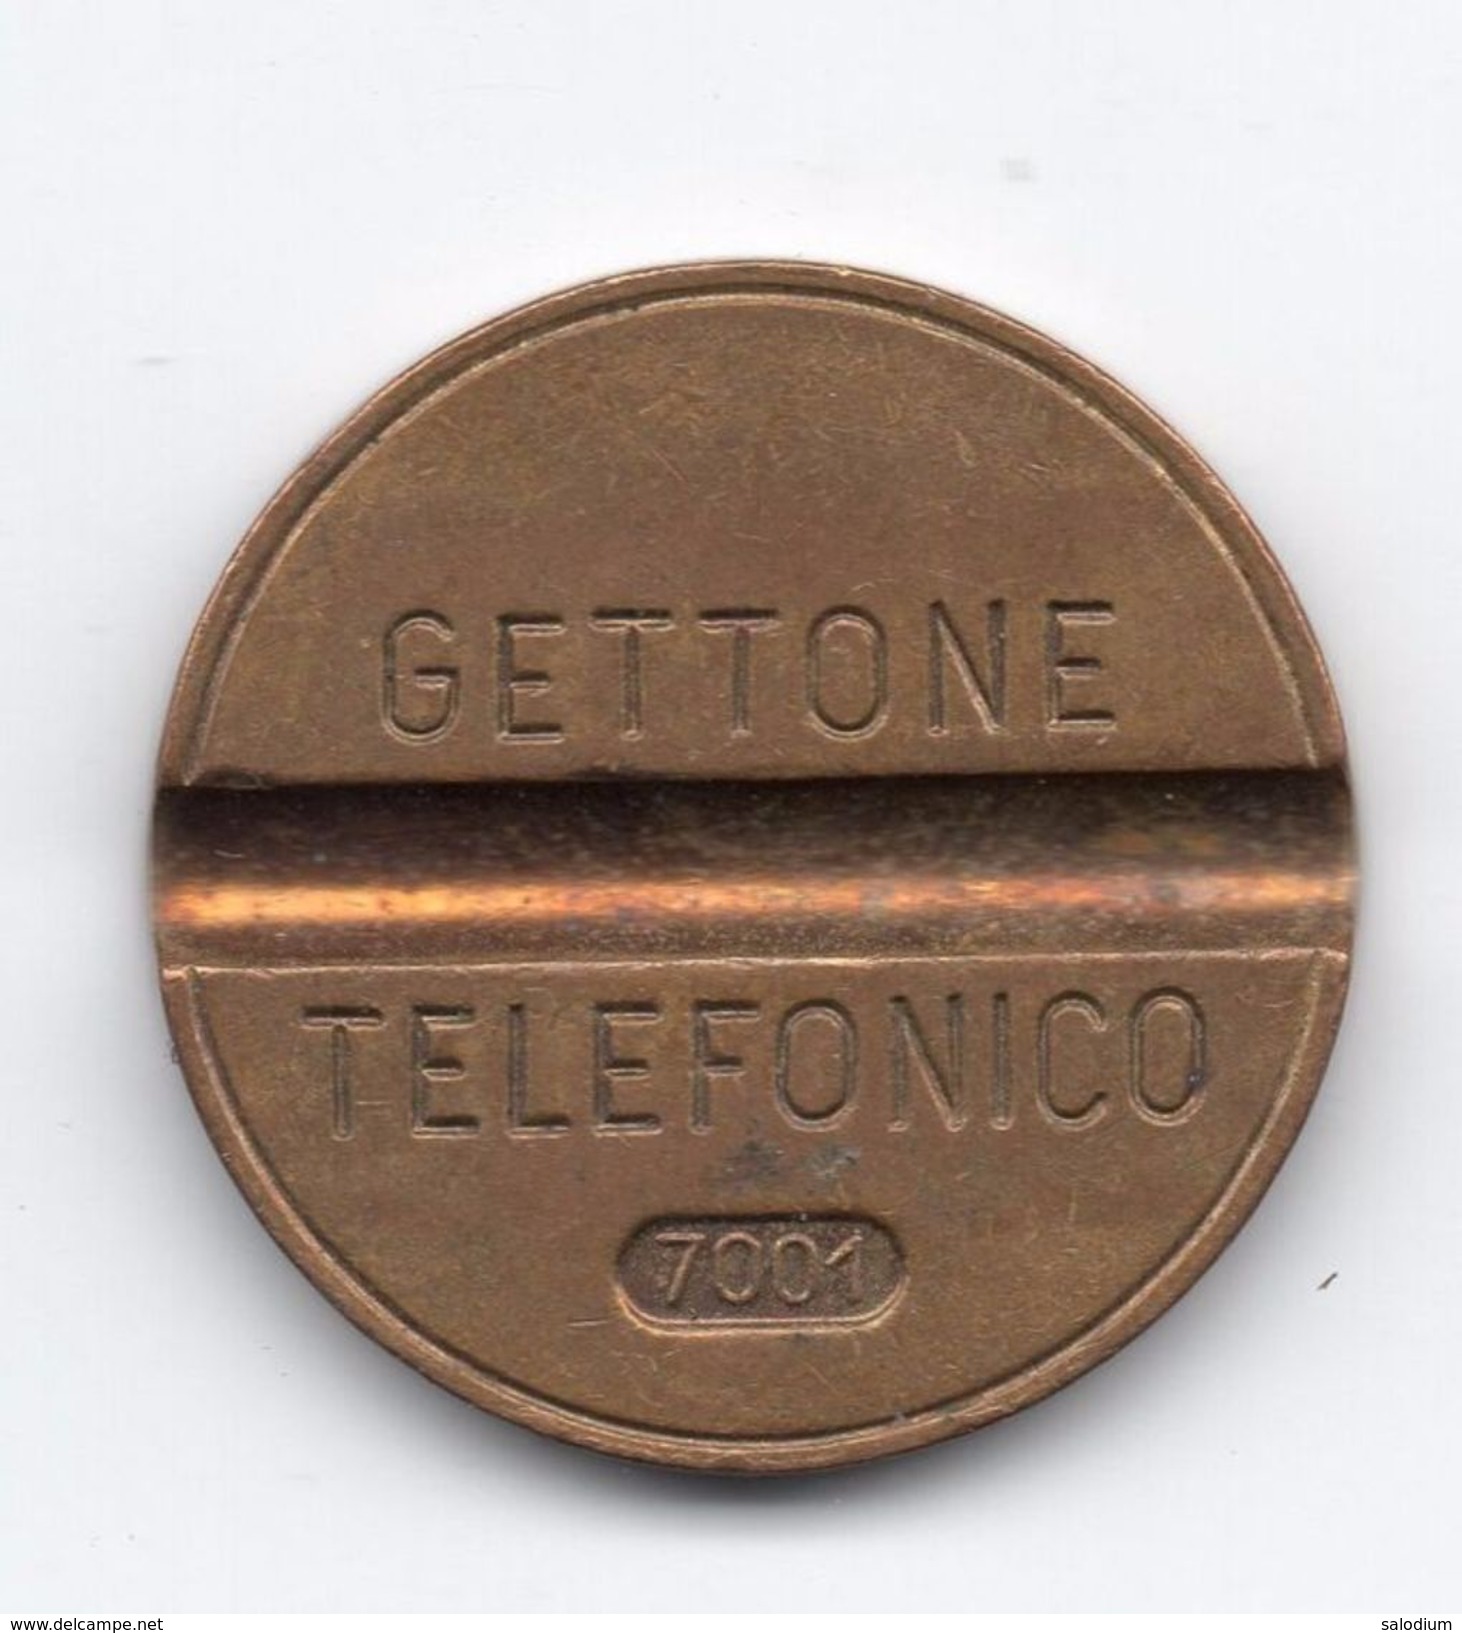 Gettone Telefonico 7001 Token Telephone - (Id-797) - Professionals/Firms